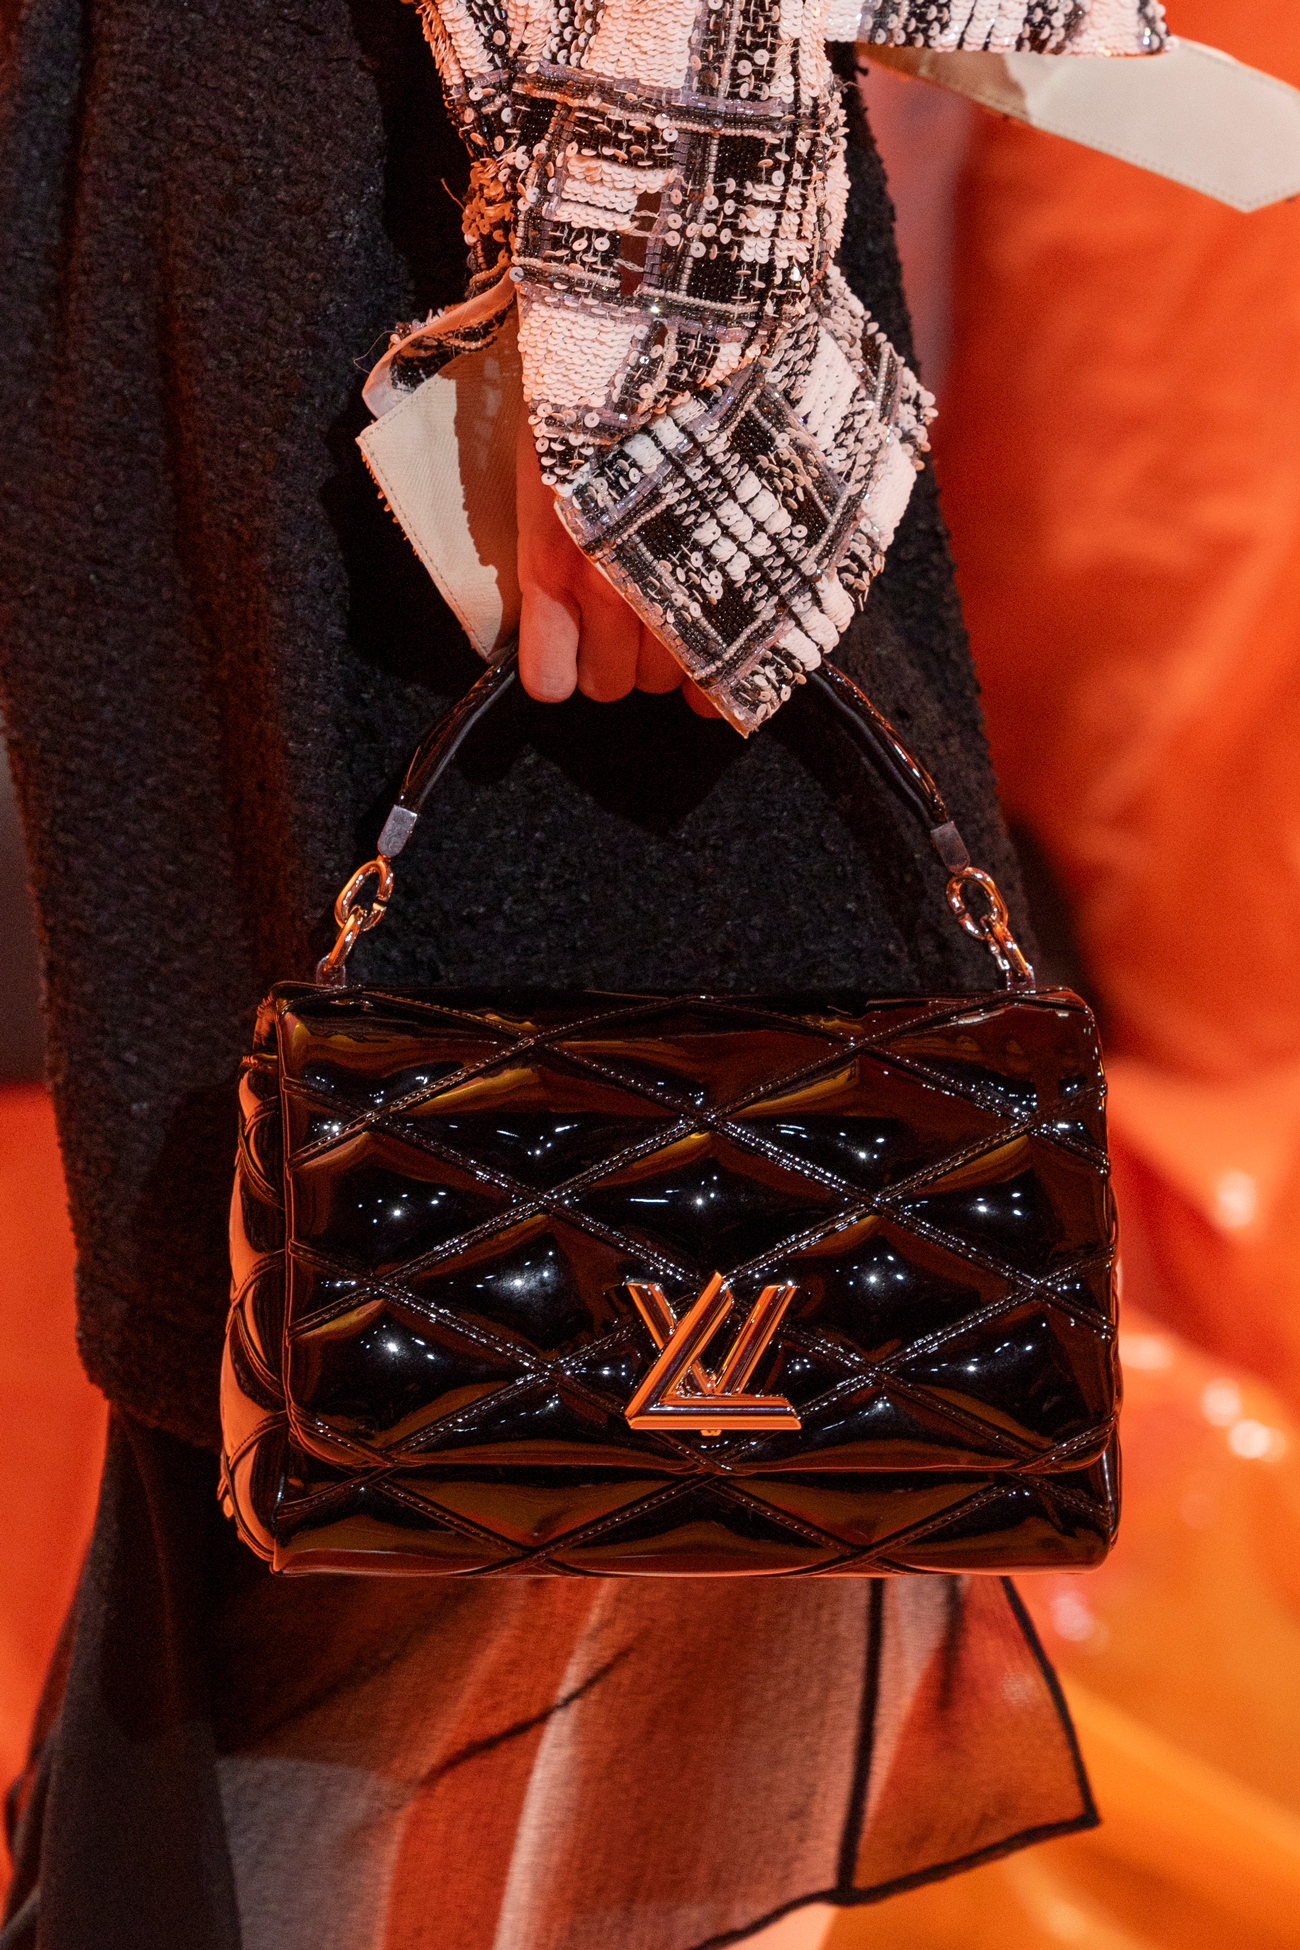 Thoughts on LV Spring/Summer 2024 bags? : r/handbags